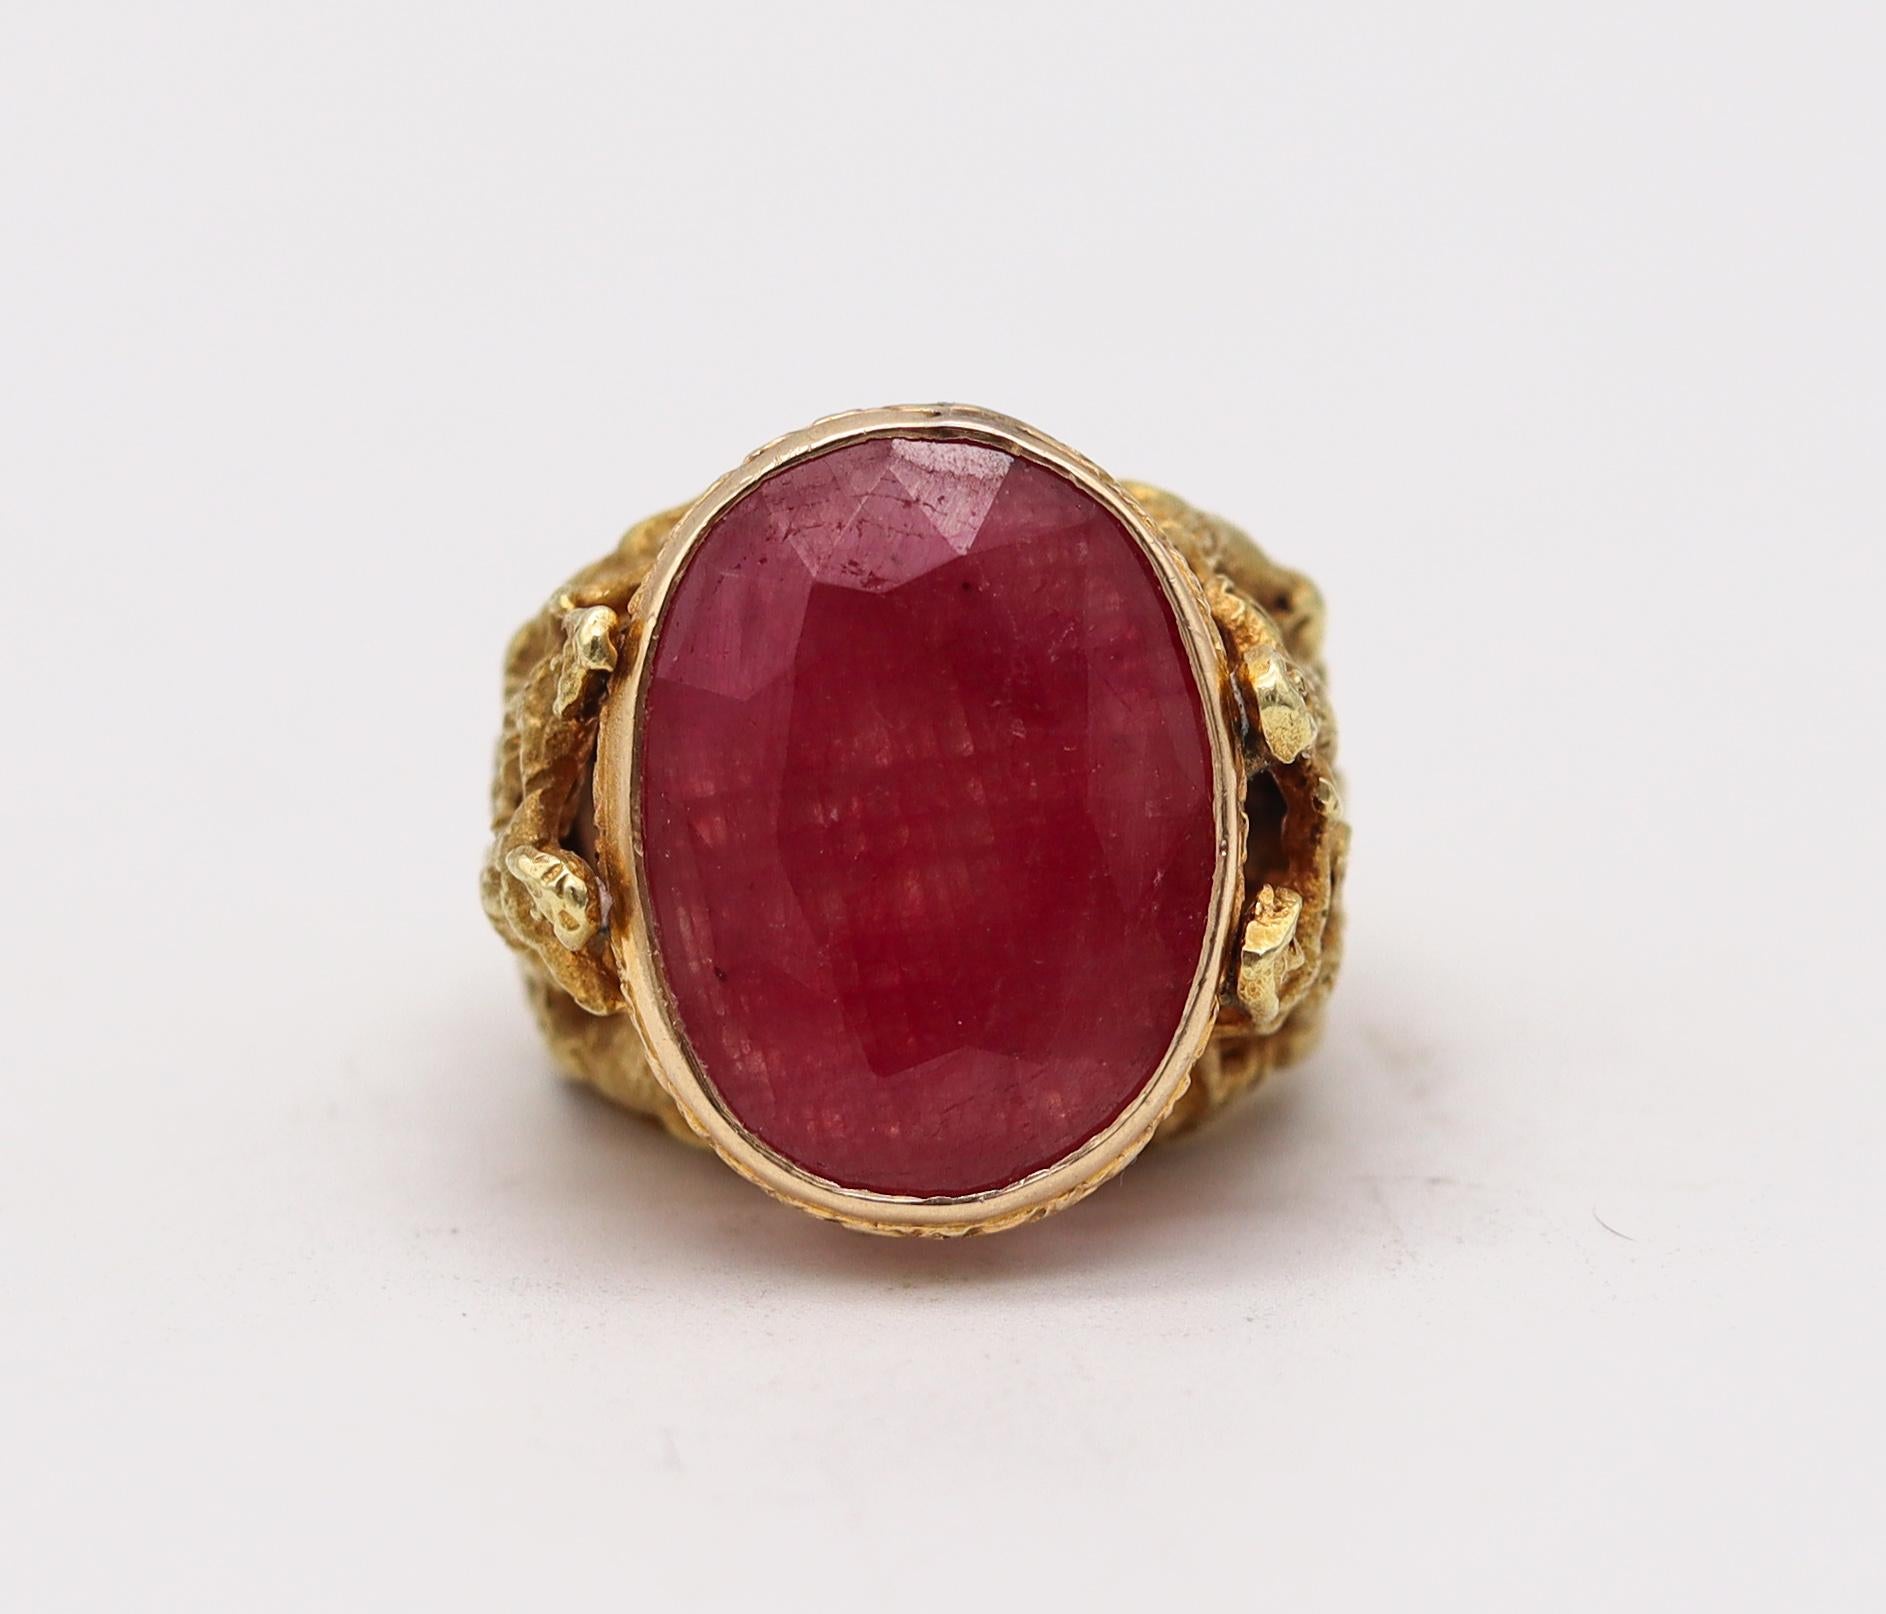 Modernist Eric De Kolb 1970 Figurative Statement Ring 18Kt Yellow Gold with 14.45 Cts Ruby